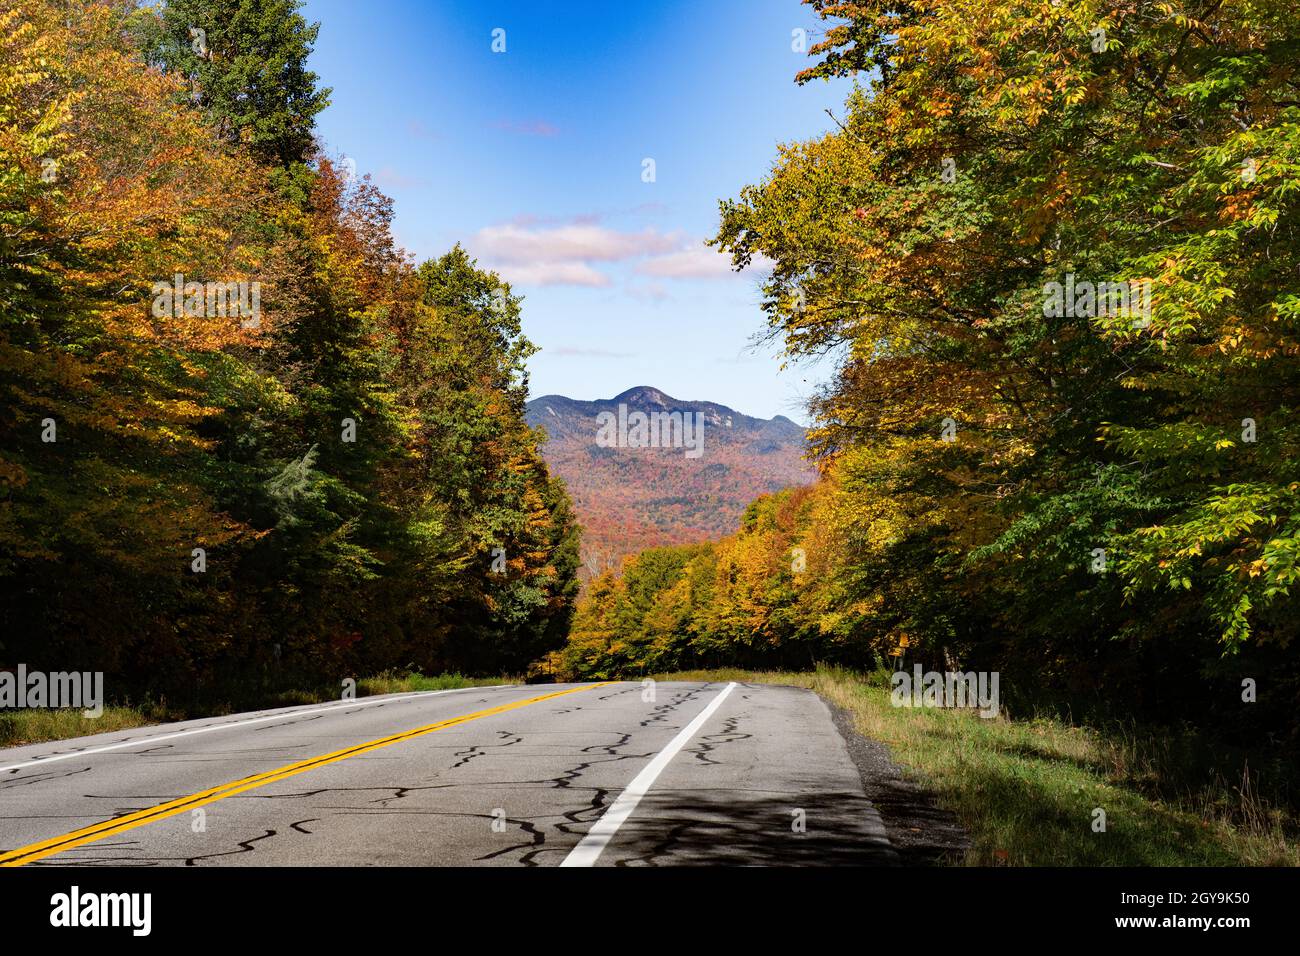 A view of Snowy Mountain in the Adirondacks in autumn from NYS Route 30 highway. Stock Photo